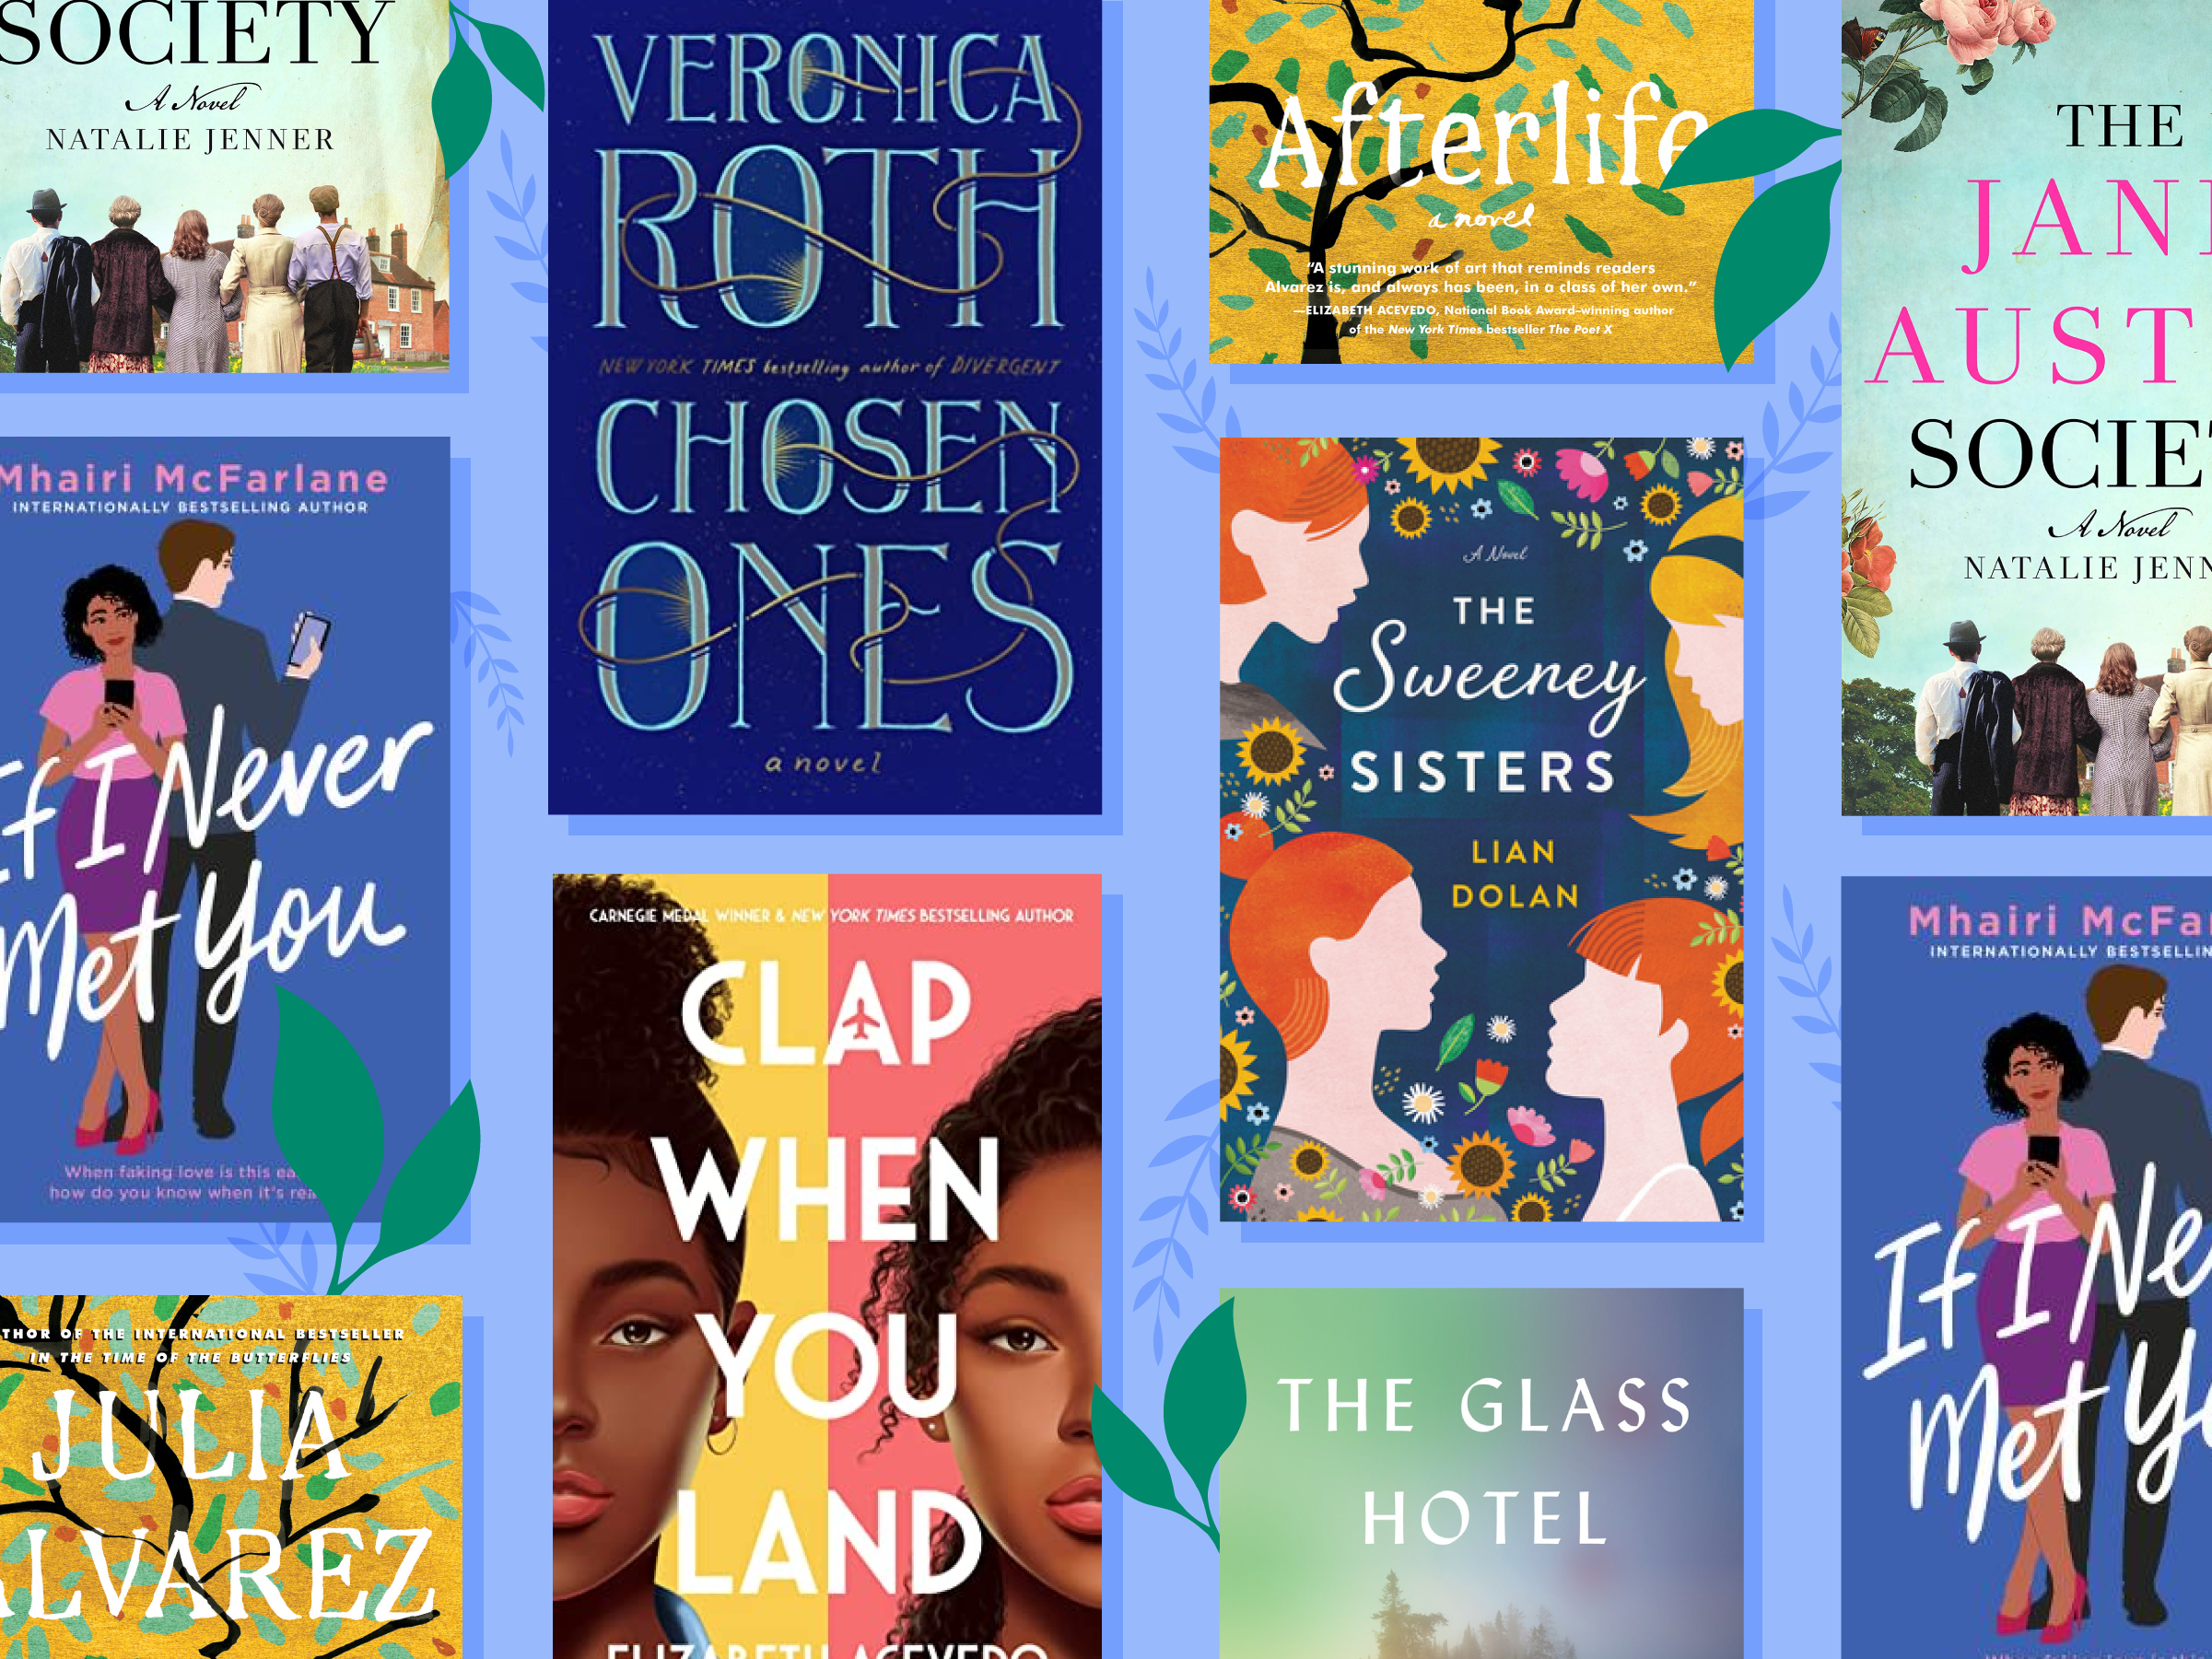 The 33 best new books to read this spring, according to Goodreads